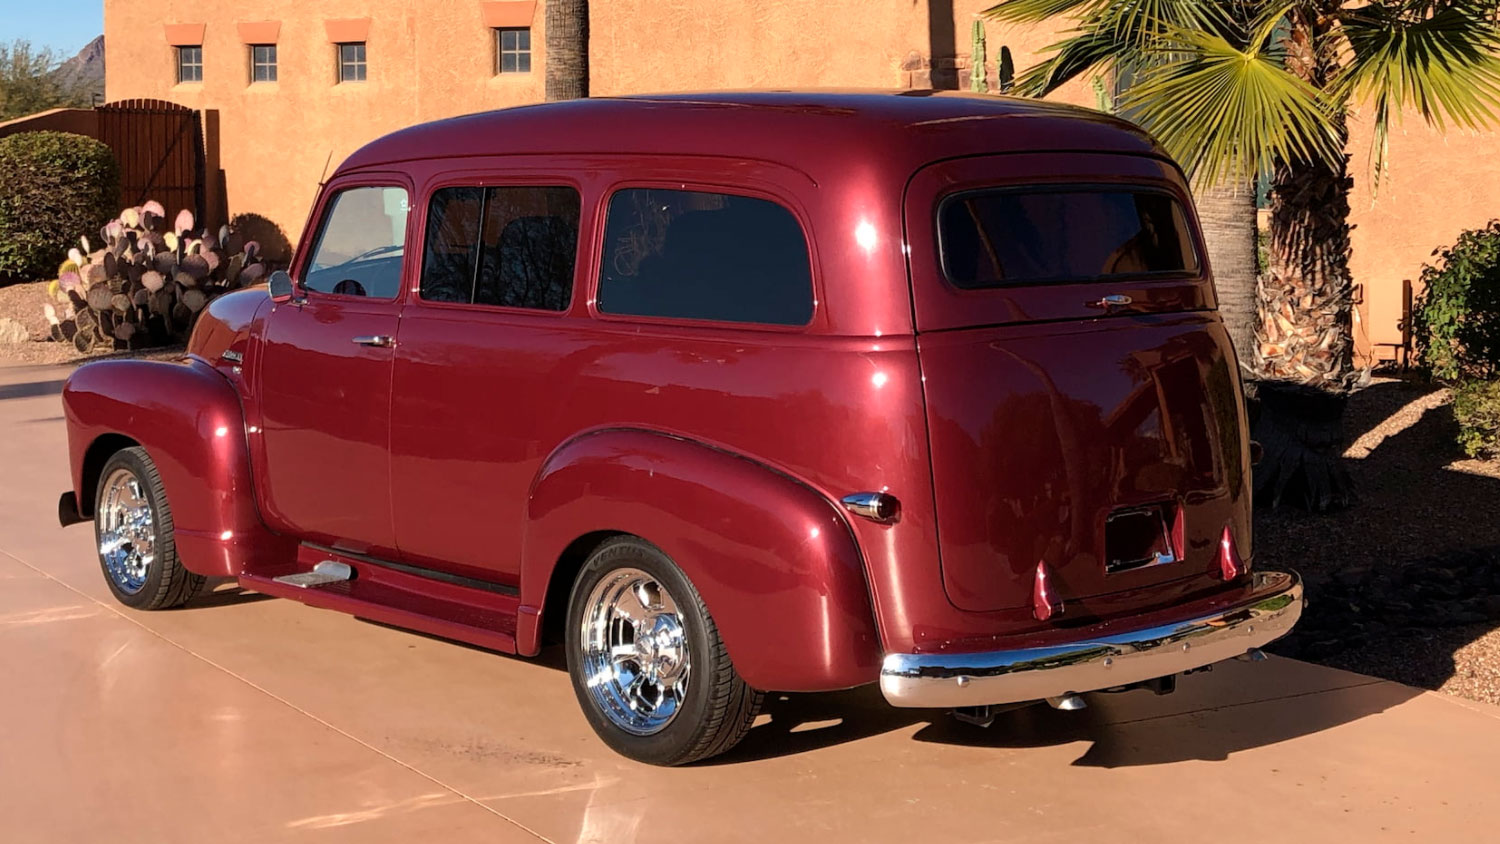 Parts & Accessories for 1948 Chevrolet Suburban for sale